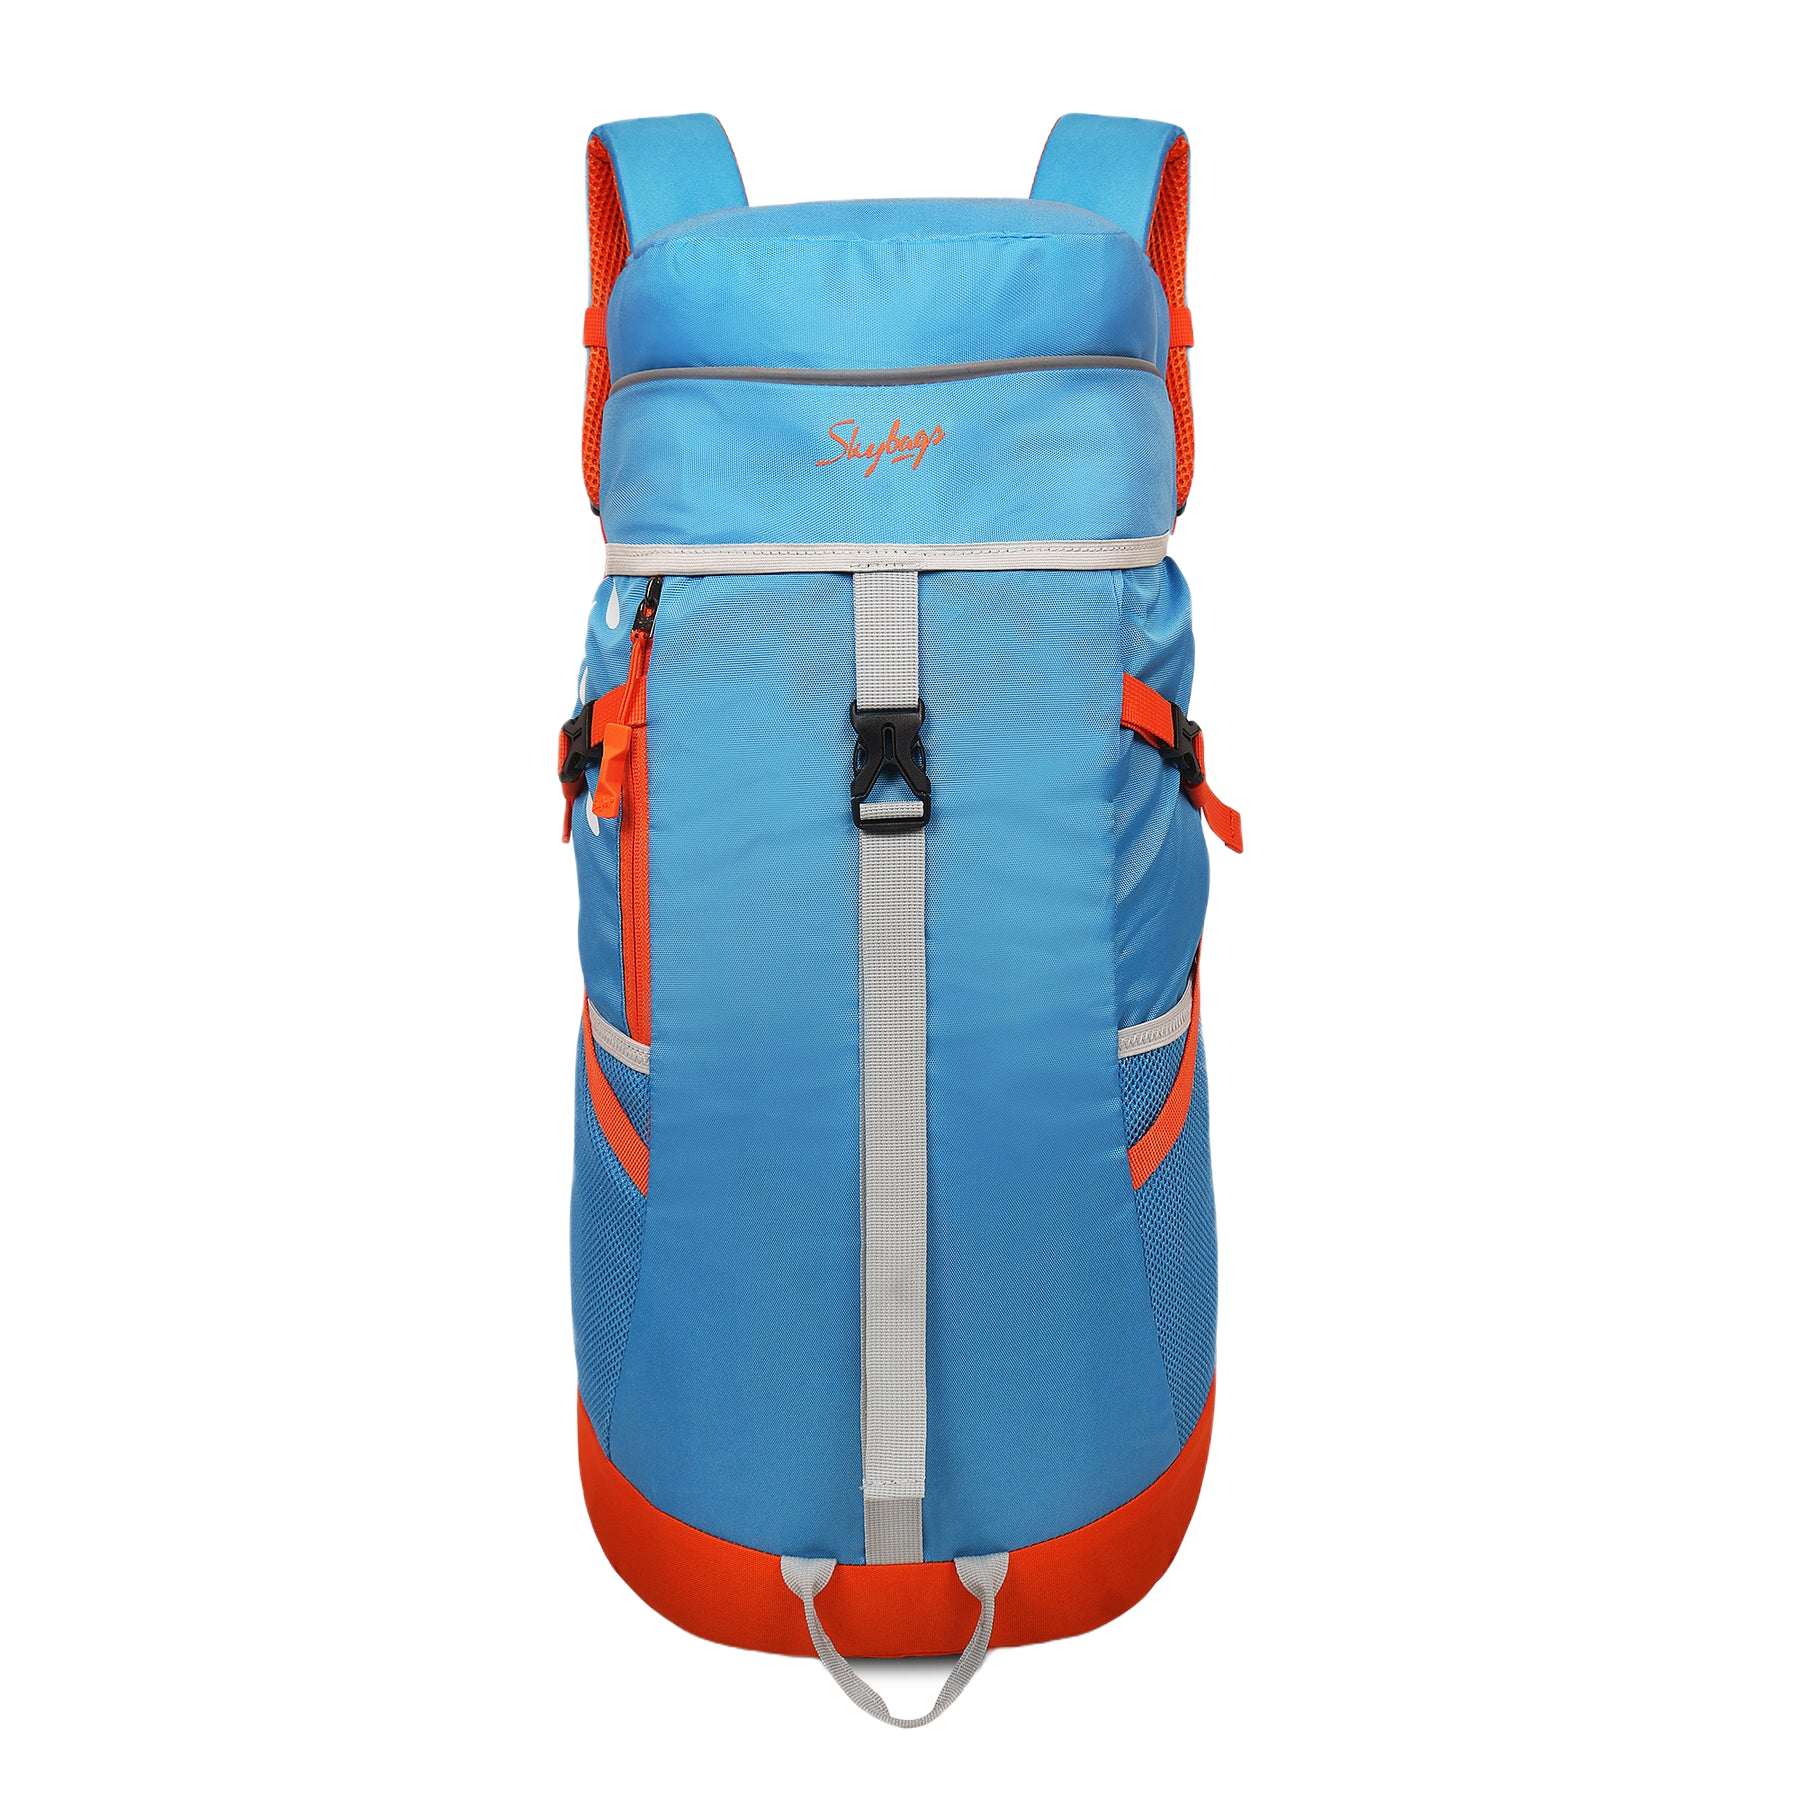 Skybags Vertex Rucksuck 45L Blue Backpack With Thick Shoulder Strap 